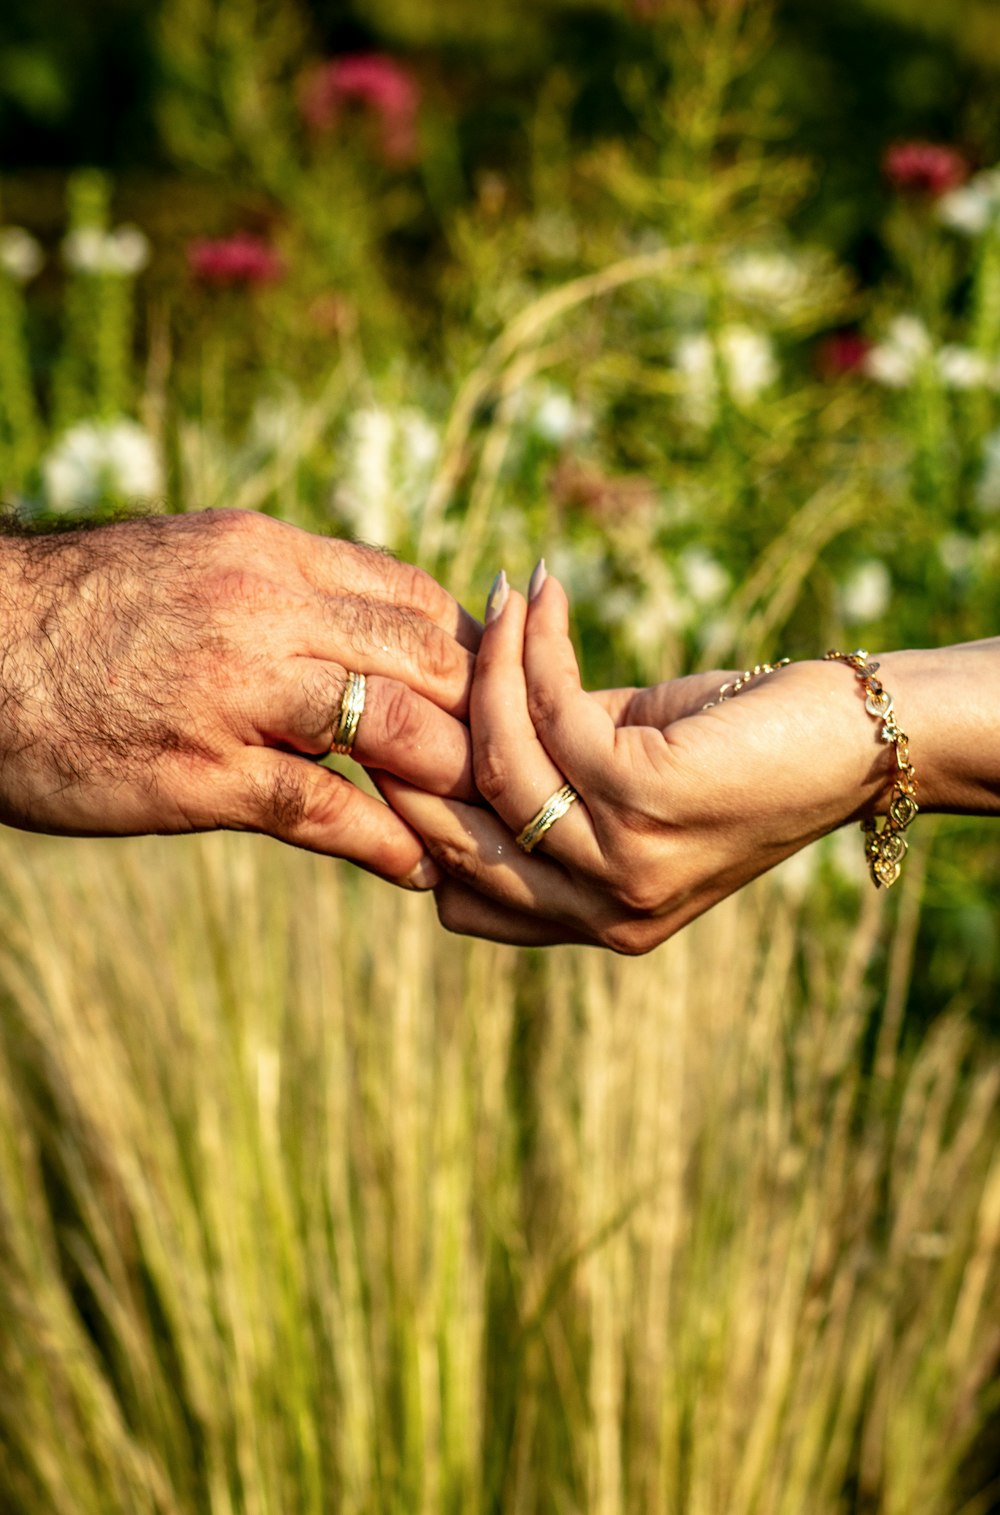 holdings hands with gold-colored ring over flower garden